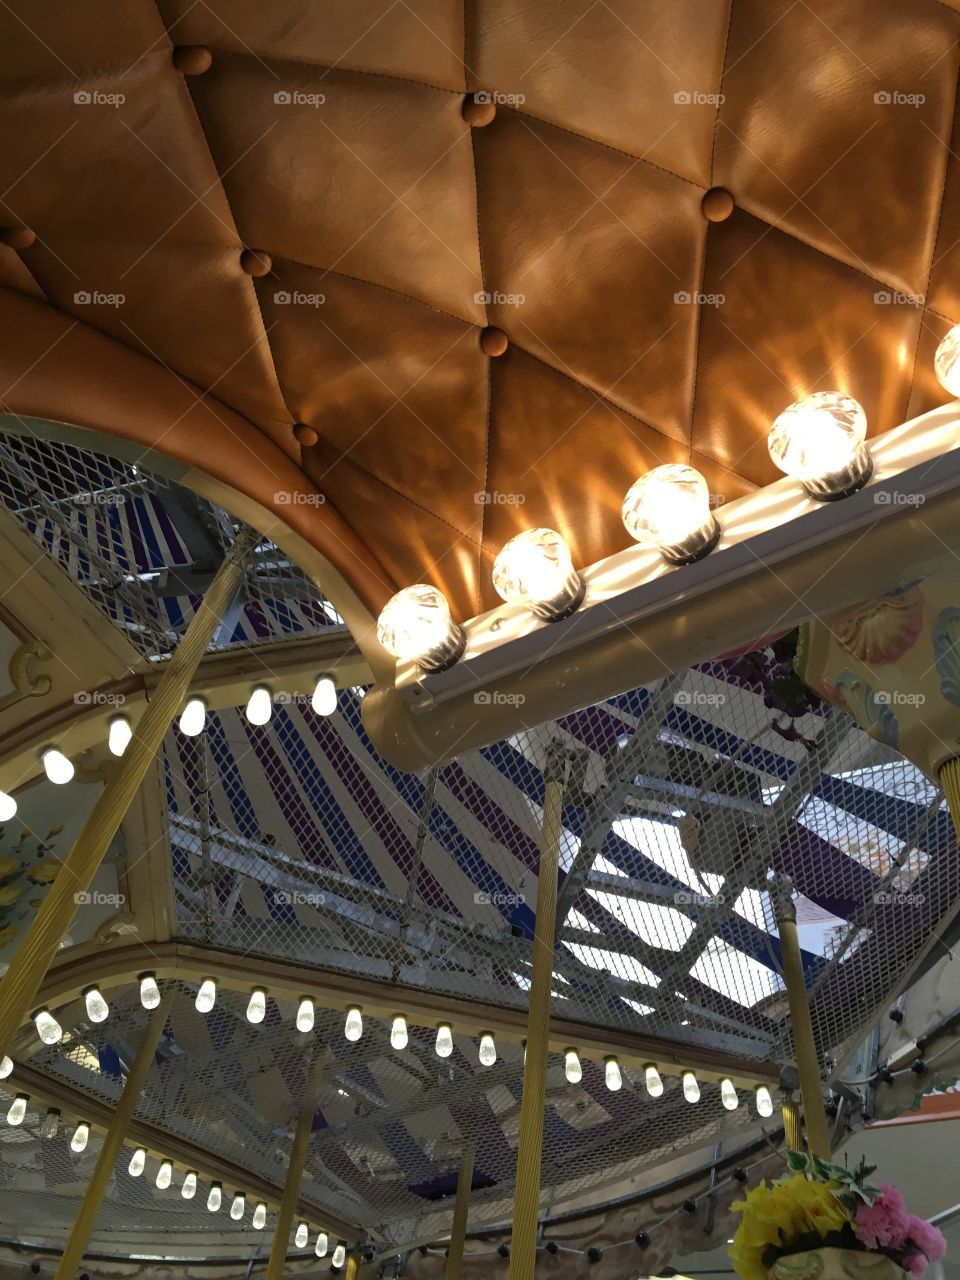 Looking up from the carousel 